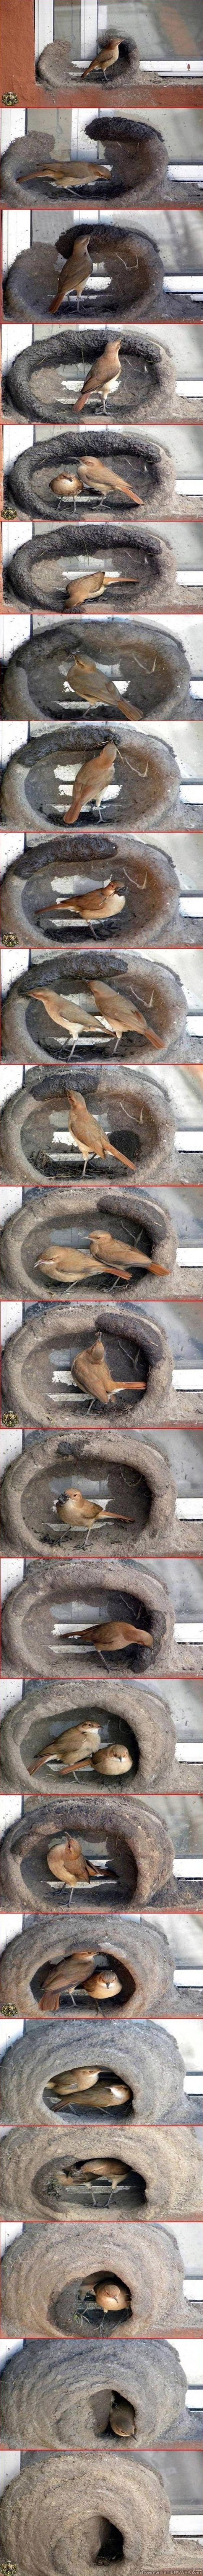 TWWWWEEEEEEET. cool pics about birds found it and hope that you havent seen it before11?!!!!!one!!!qestionmark!!!!))oneone!1111!!!!.. repost